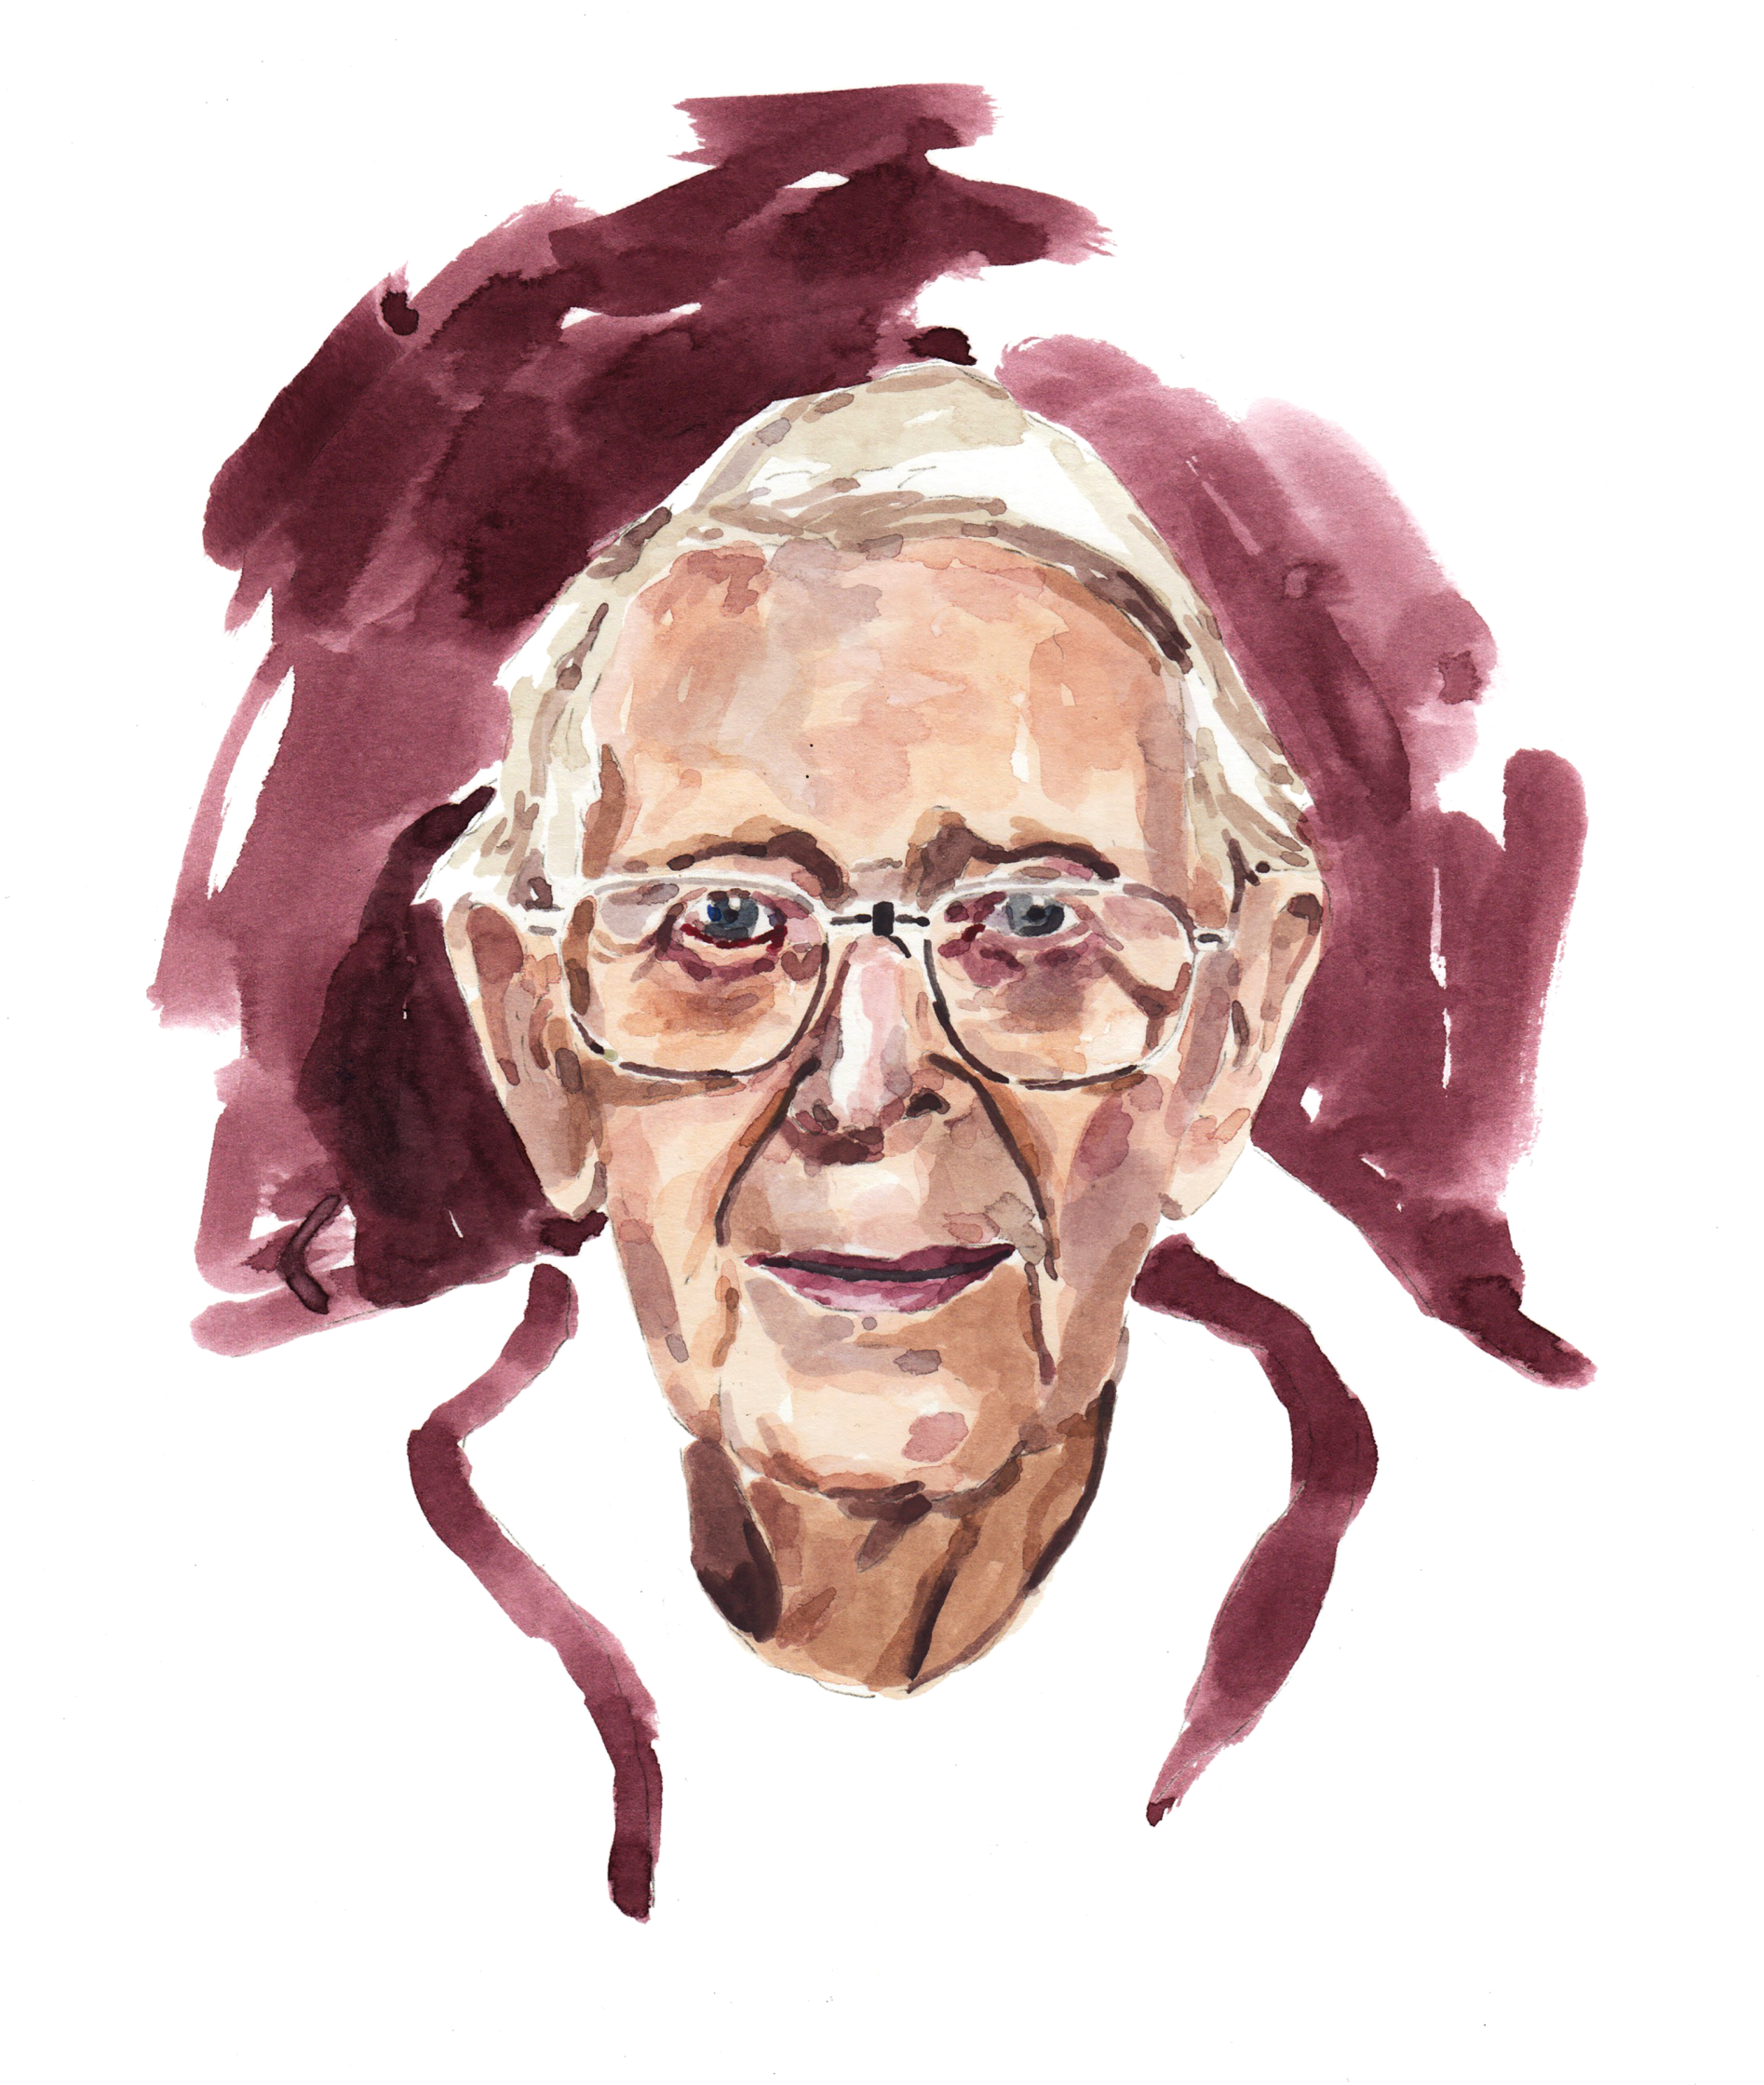 COMMISSIONED_BY_JOHN_BROWN_MEDIA_FOR_A_FEATURE_ABOUT_CENTENARIANS_CHARLES_CUTHBERT.jpg